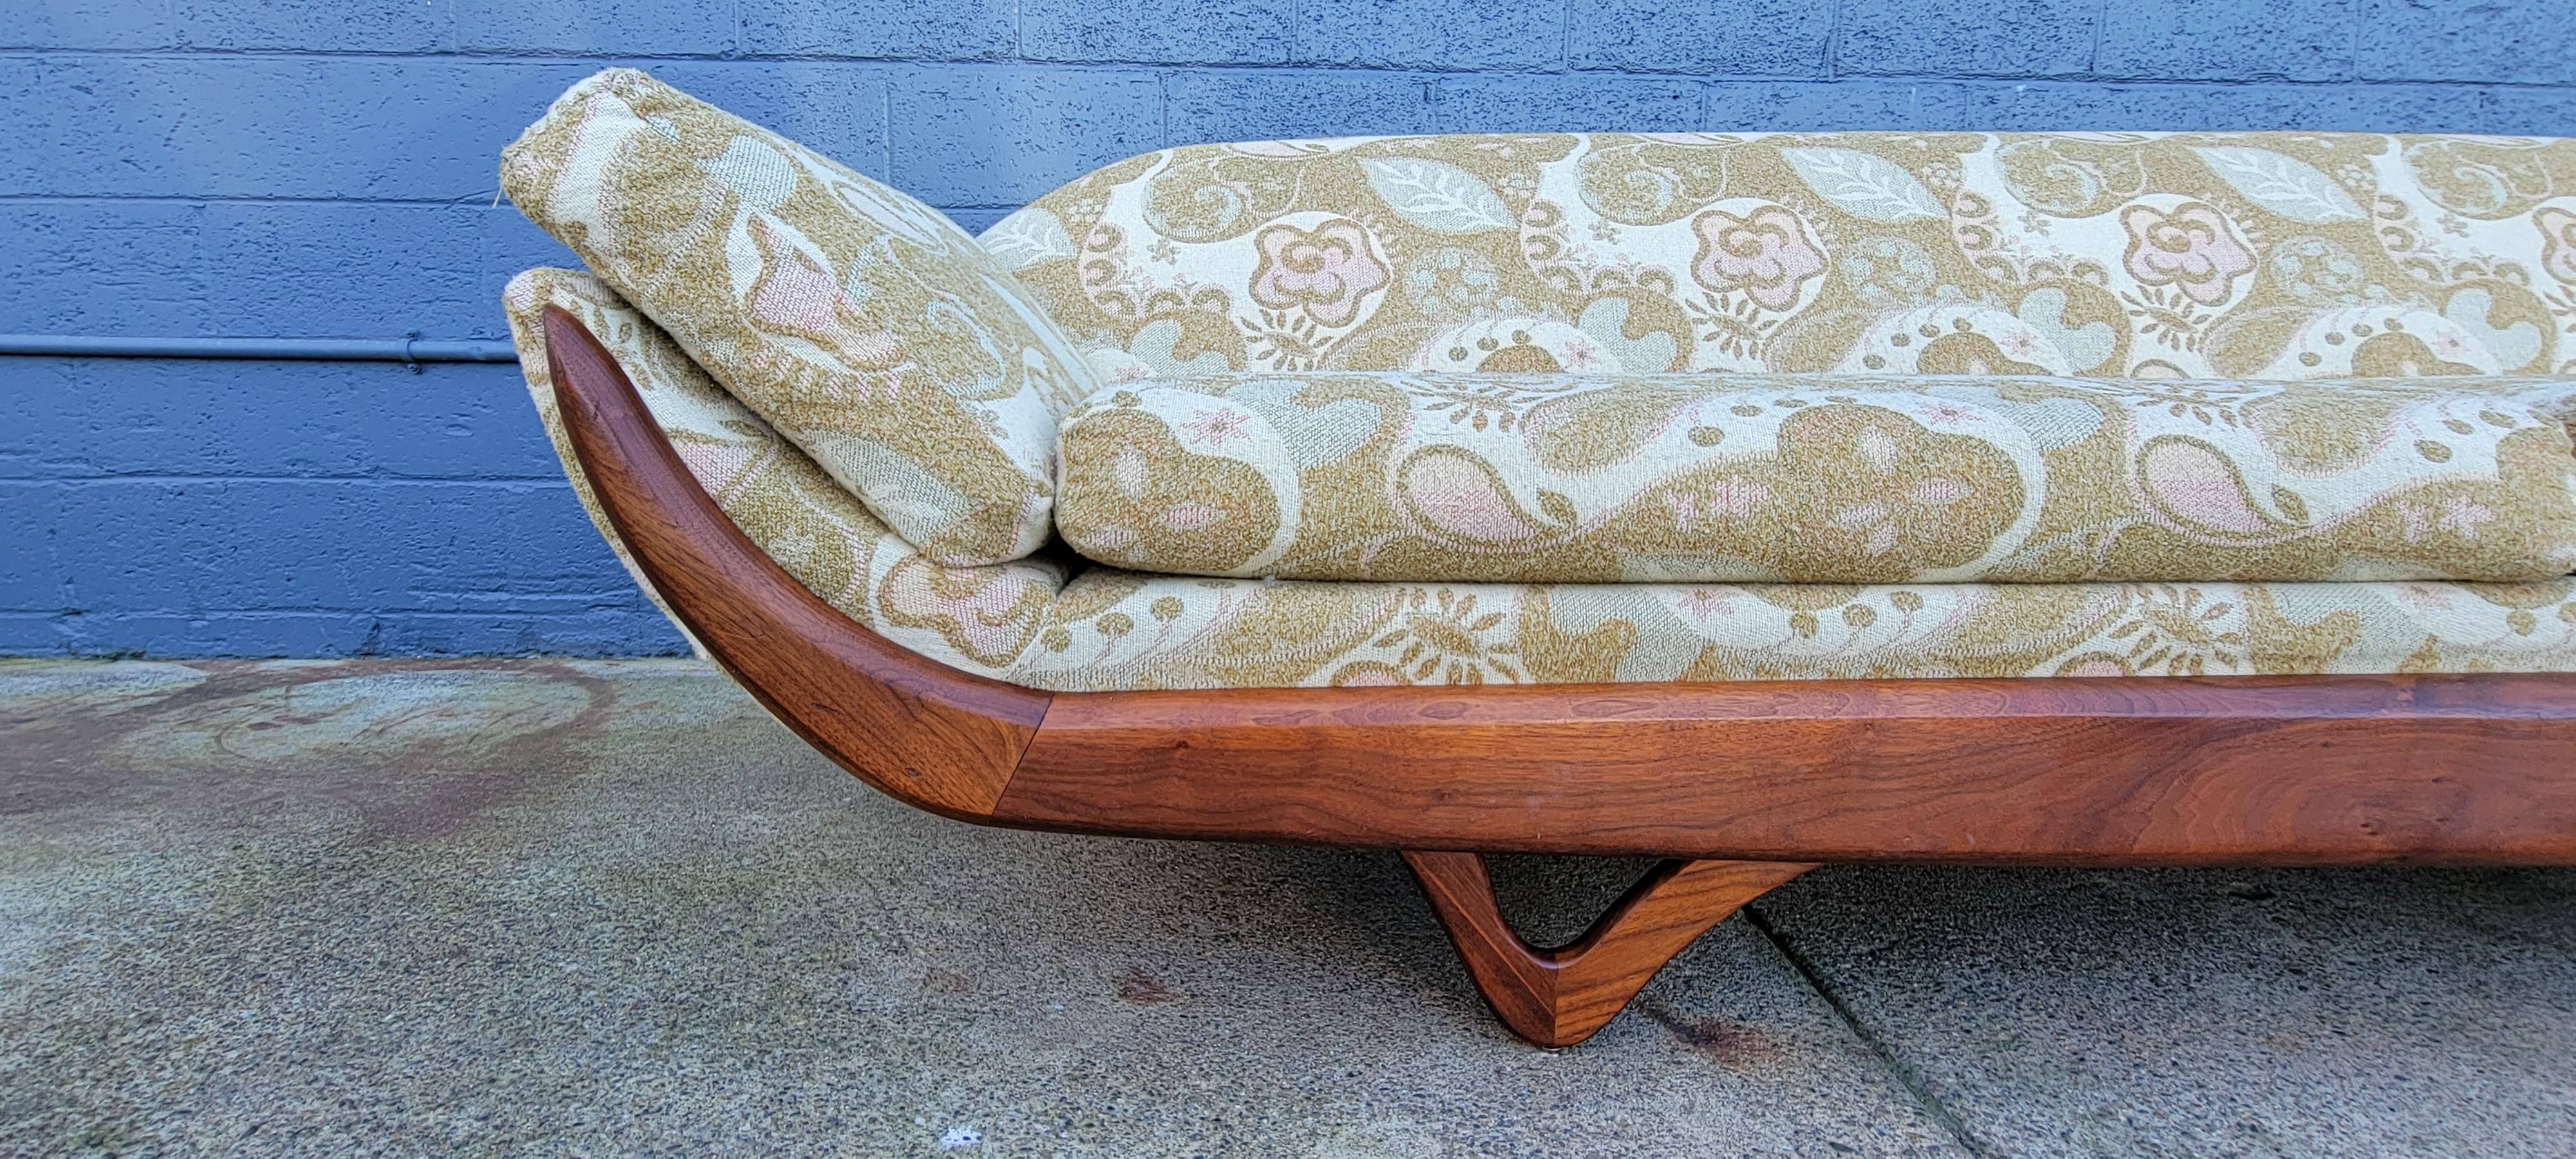 1970's Gondola sofa by Tempo Furniture. Solid walnut frame, 4 reversible cushions. Amazing original condition with very mild wear. Classic, iconic design in the style of Adrian Pearsall. Measures 100.5 inches wide.